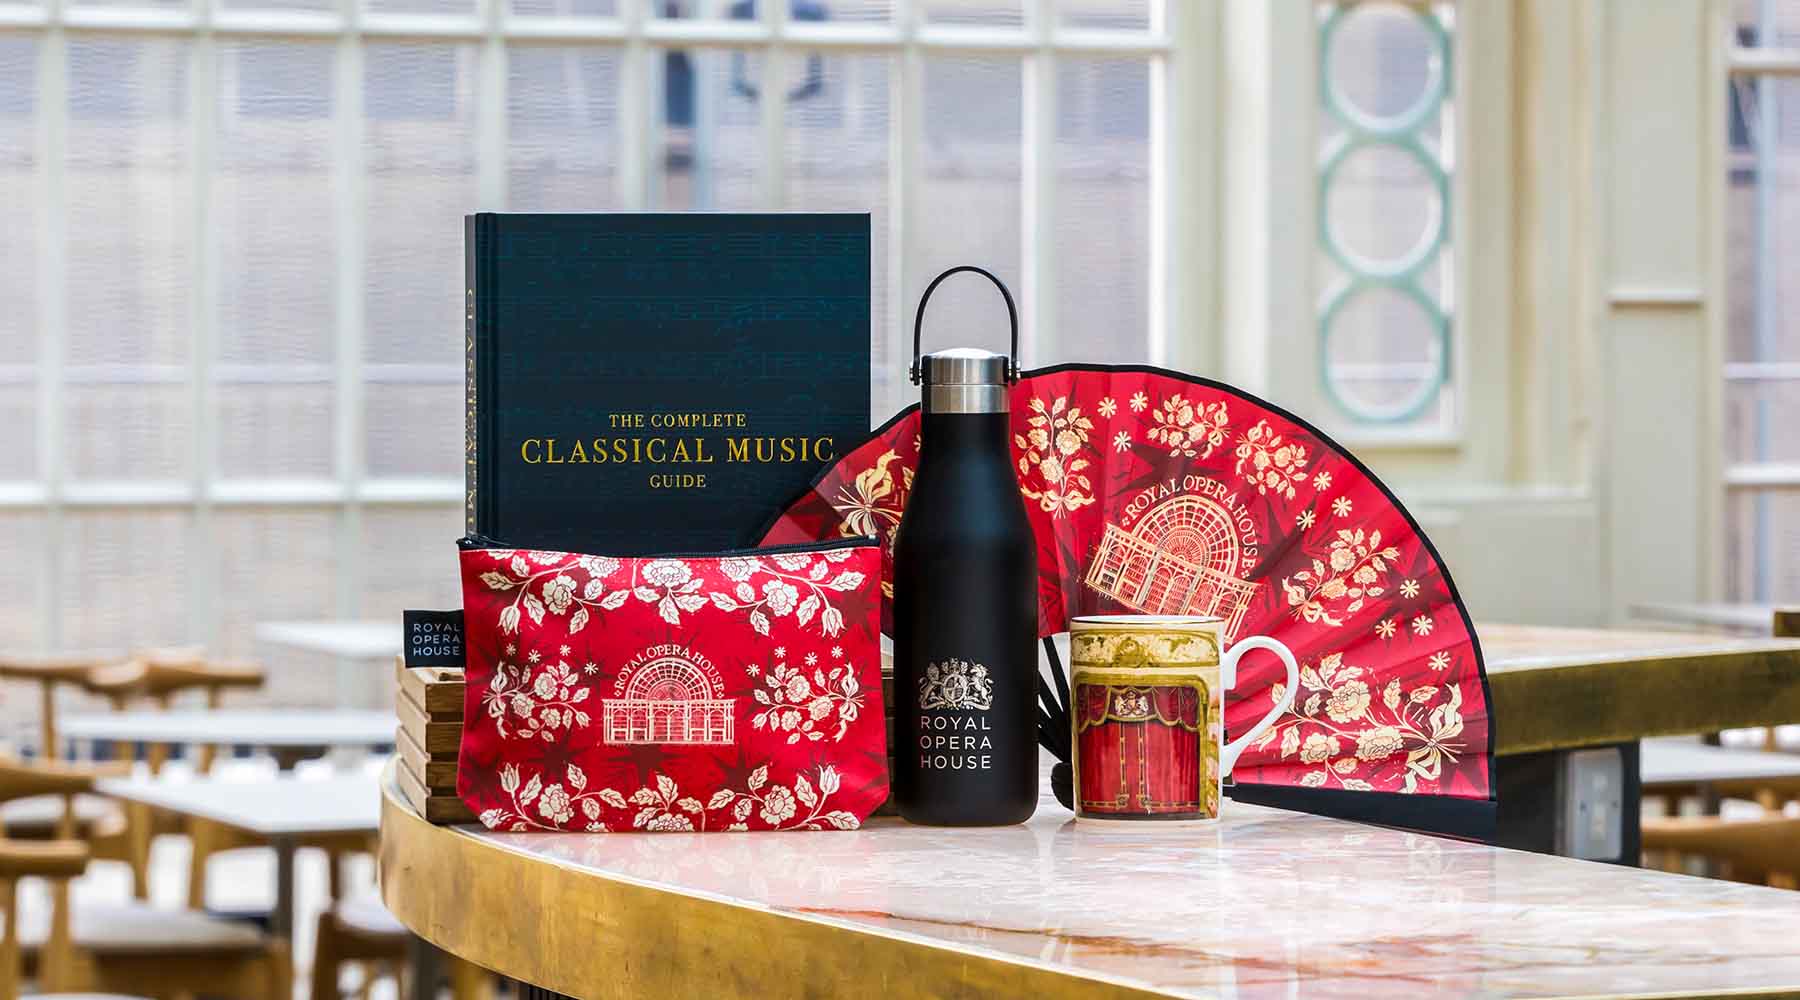 Products featuring the Royal Opera House in the Paul Hamlyn Hall